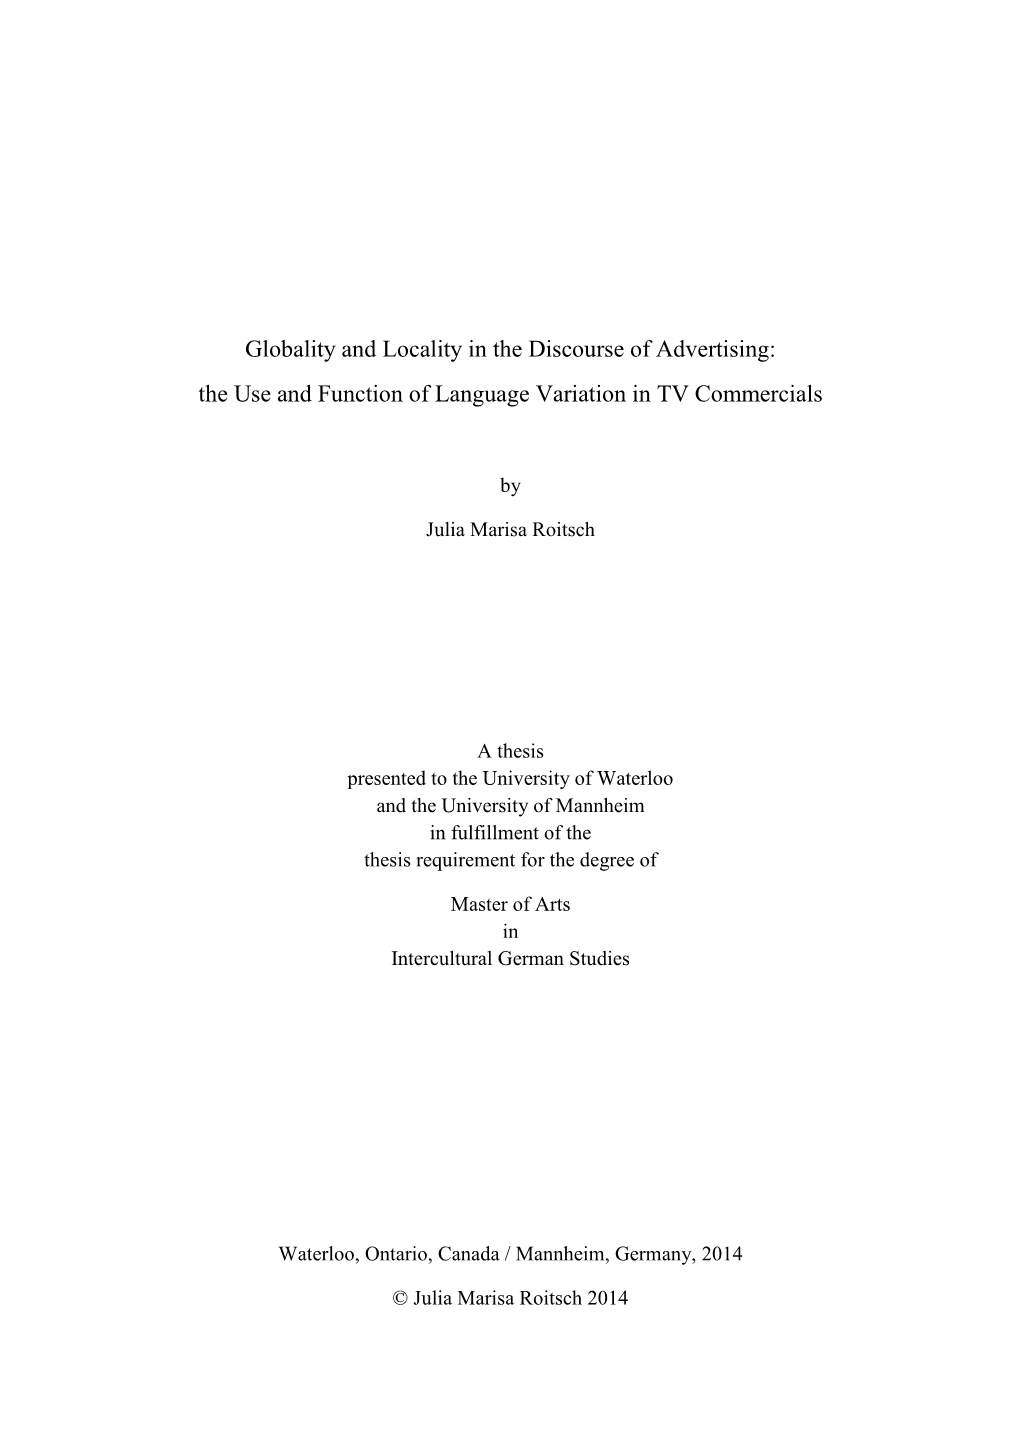 Globality and Locality in the Discourse of Advertising: the Use and Function of Language Variation in TV Commercials